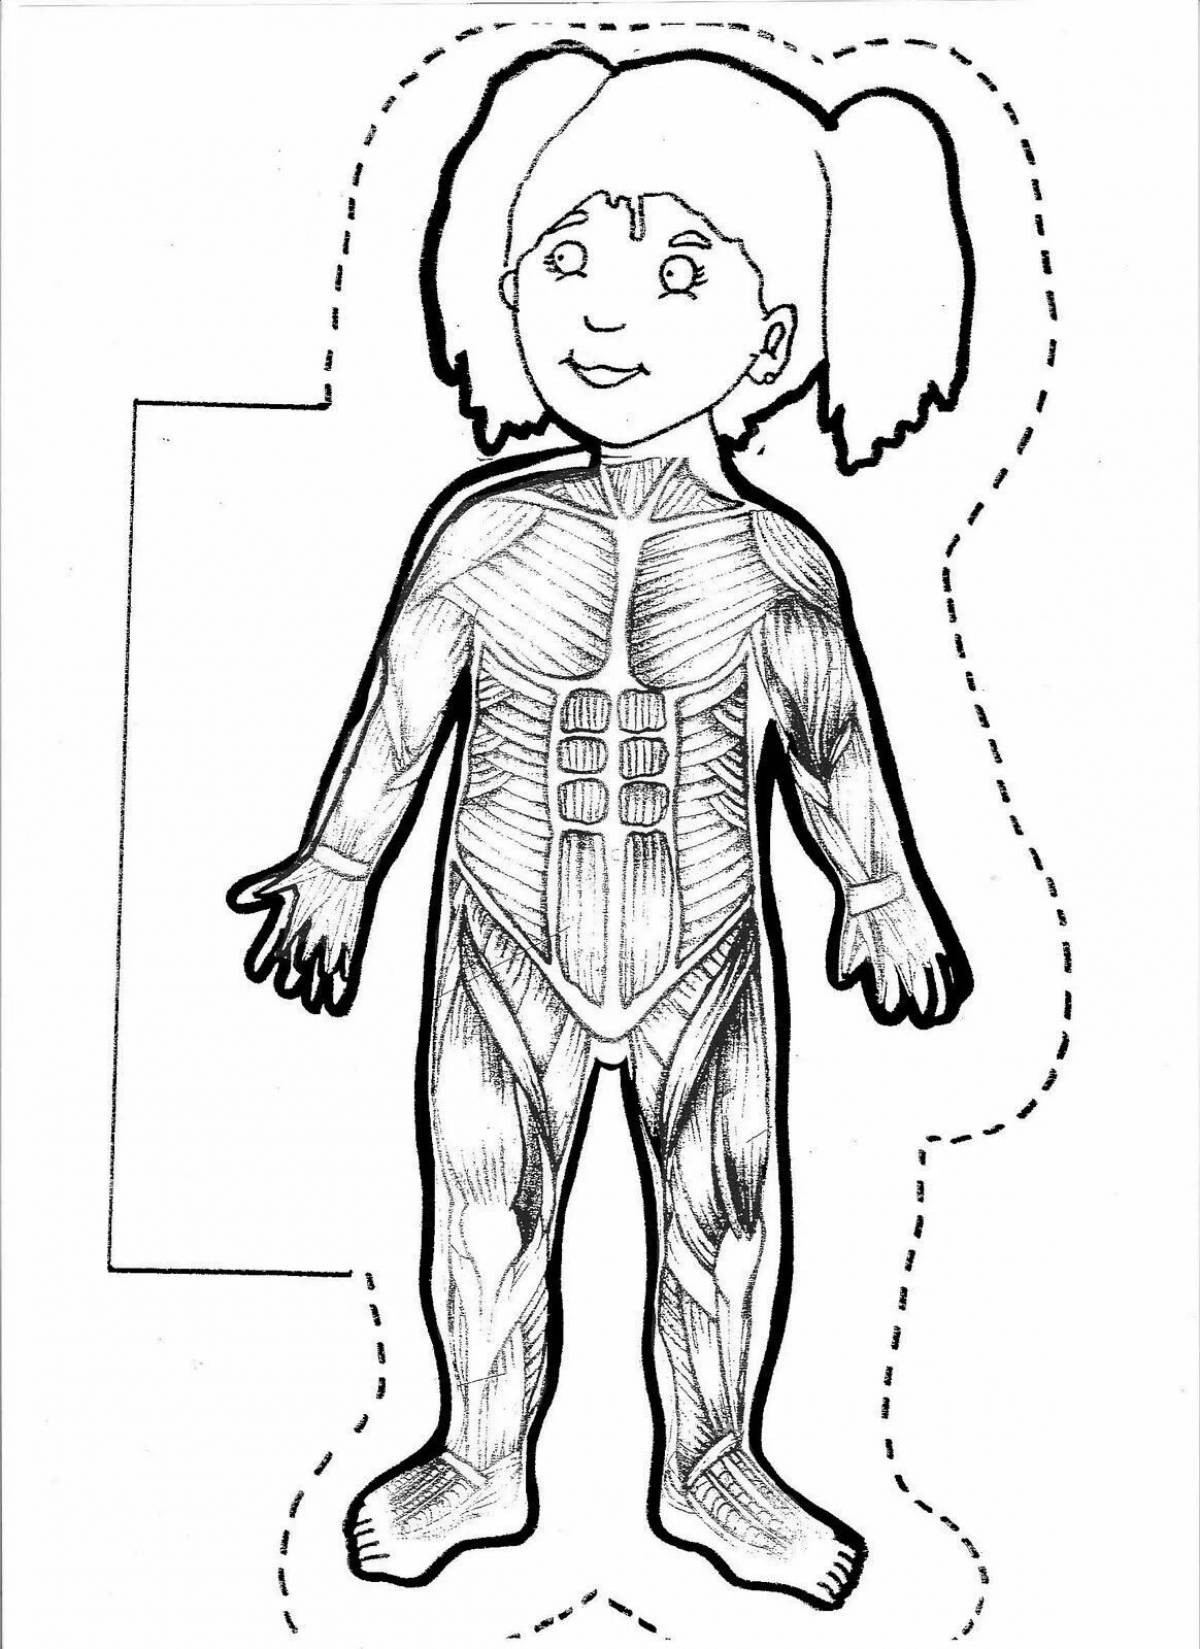 Colorful human structure coloring page for pre-k